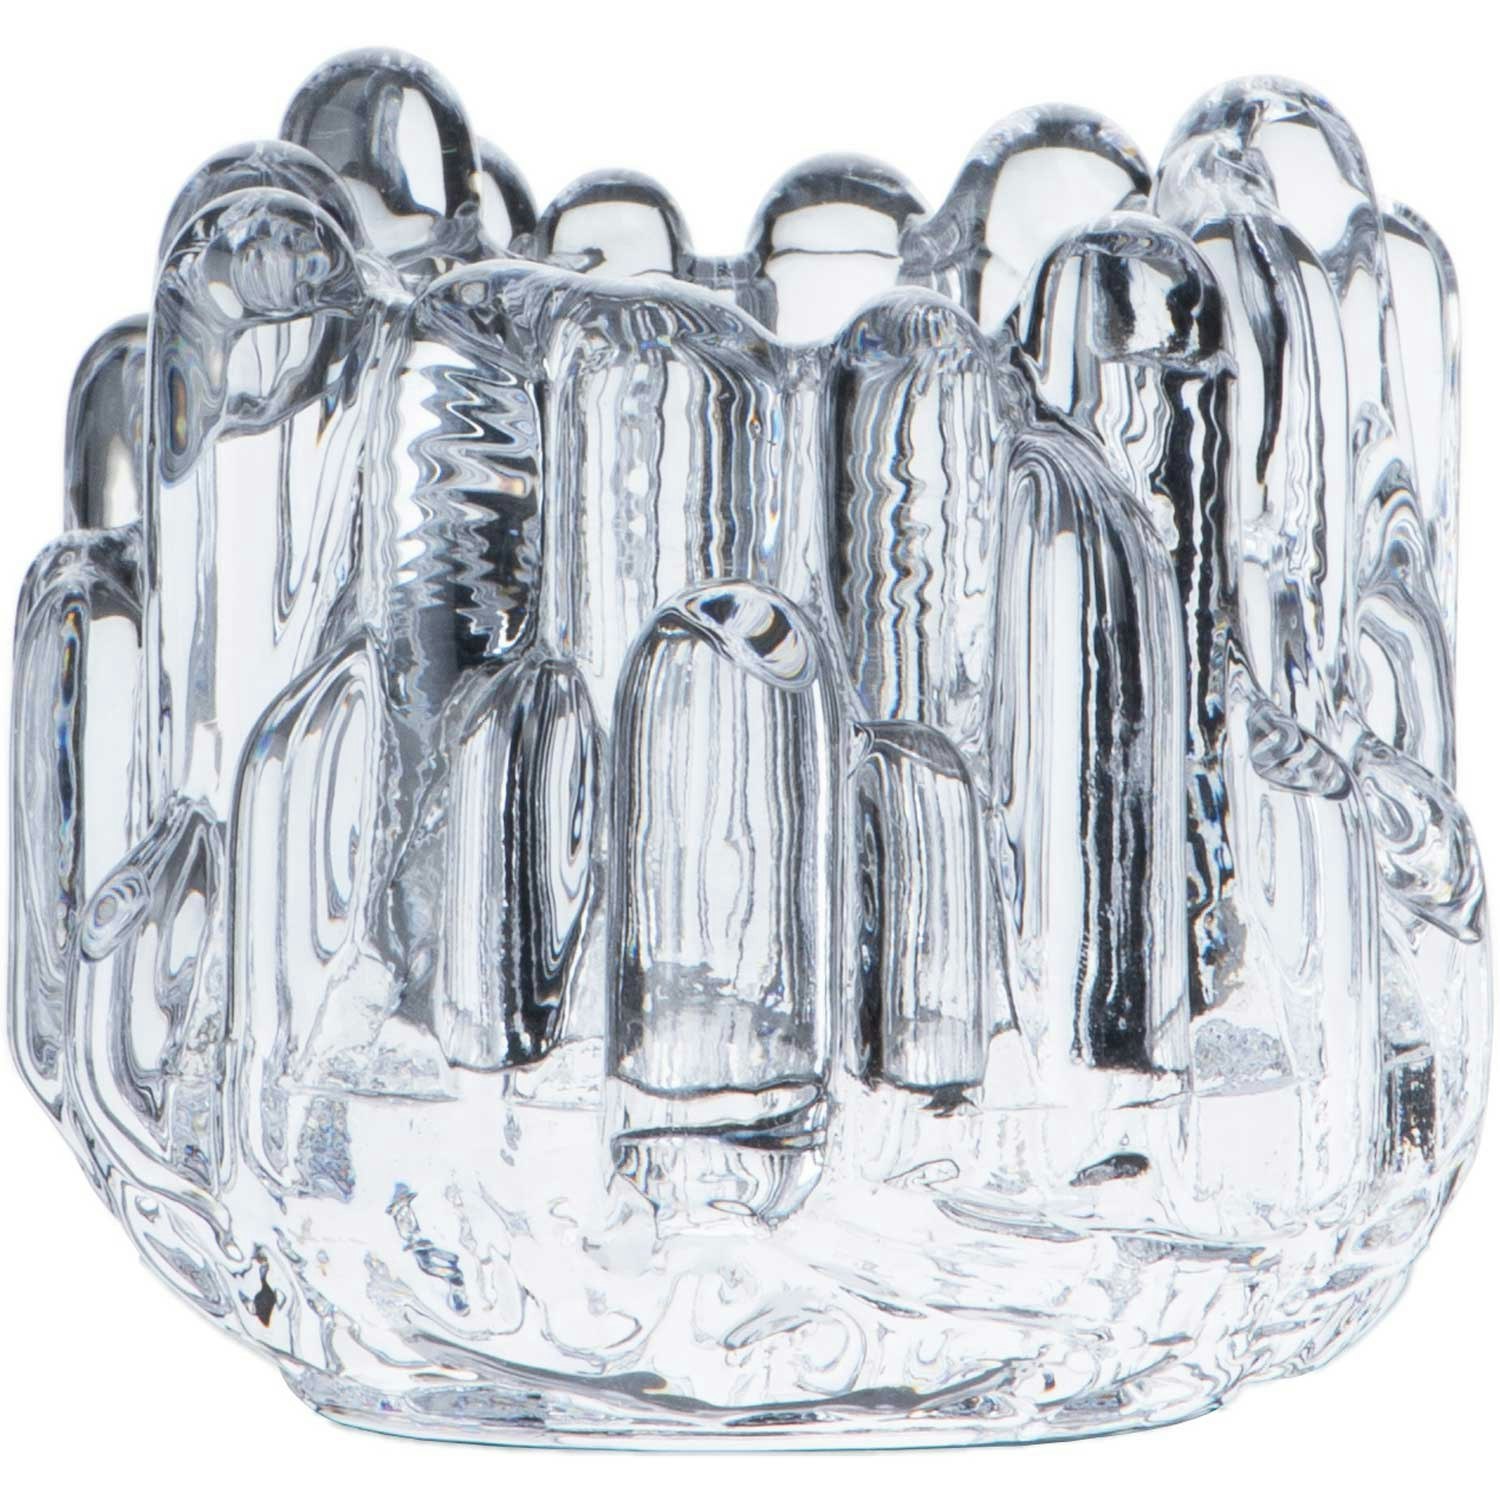 NW89737 Pine Forest Bundt Cake Pan by Nordic Ware 89737